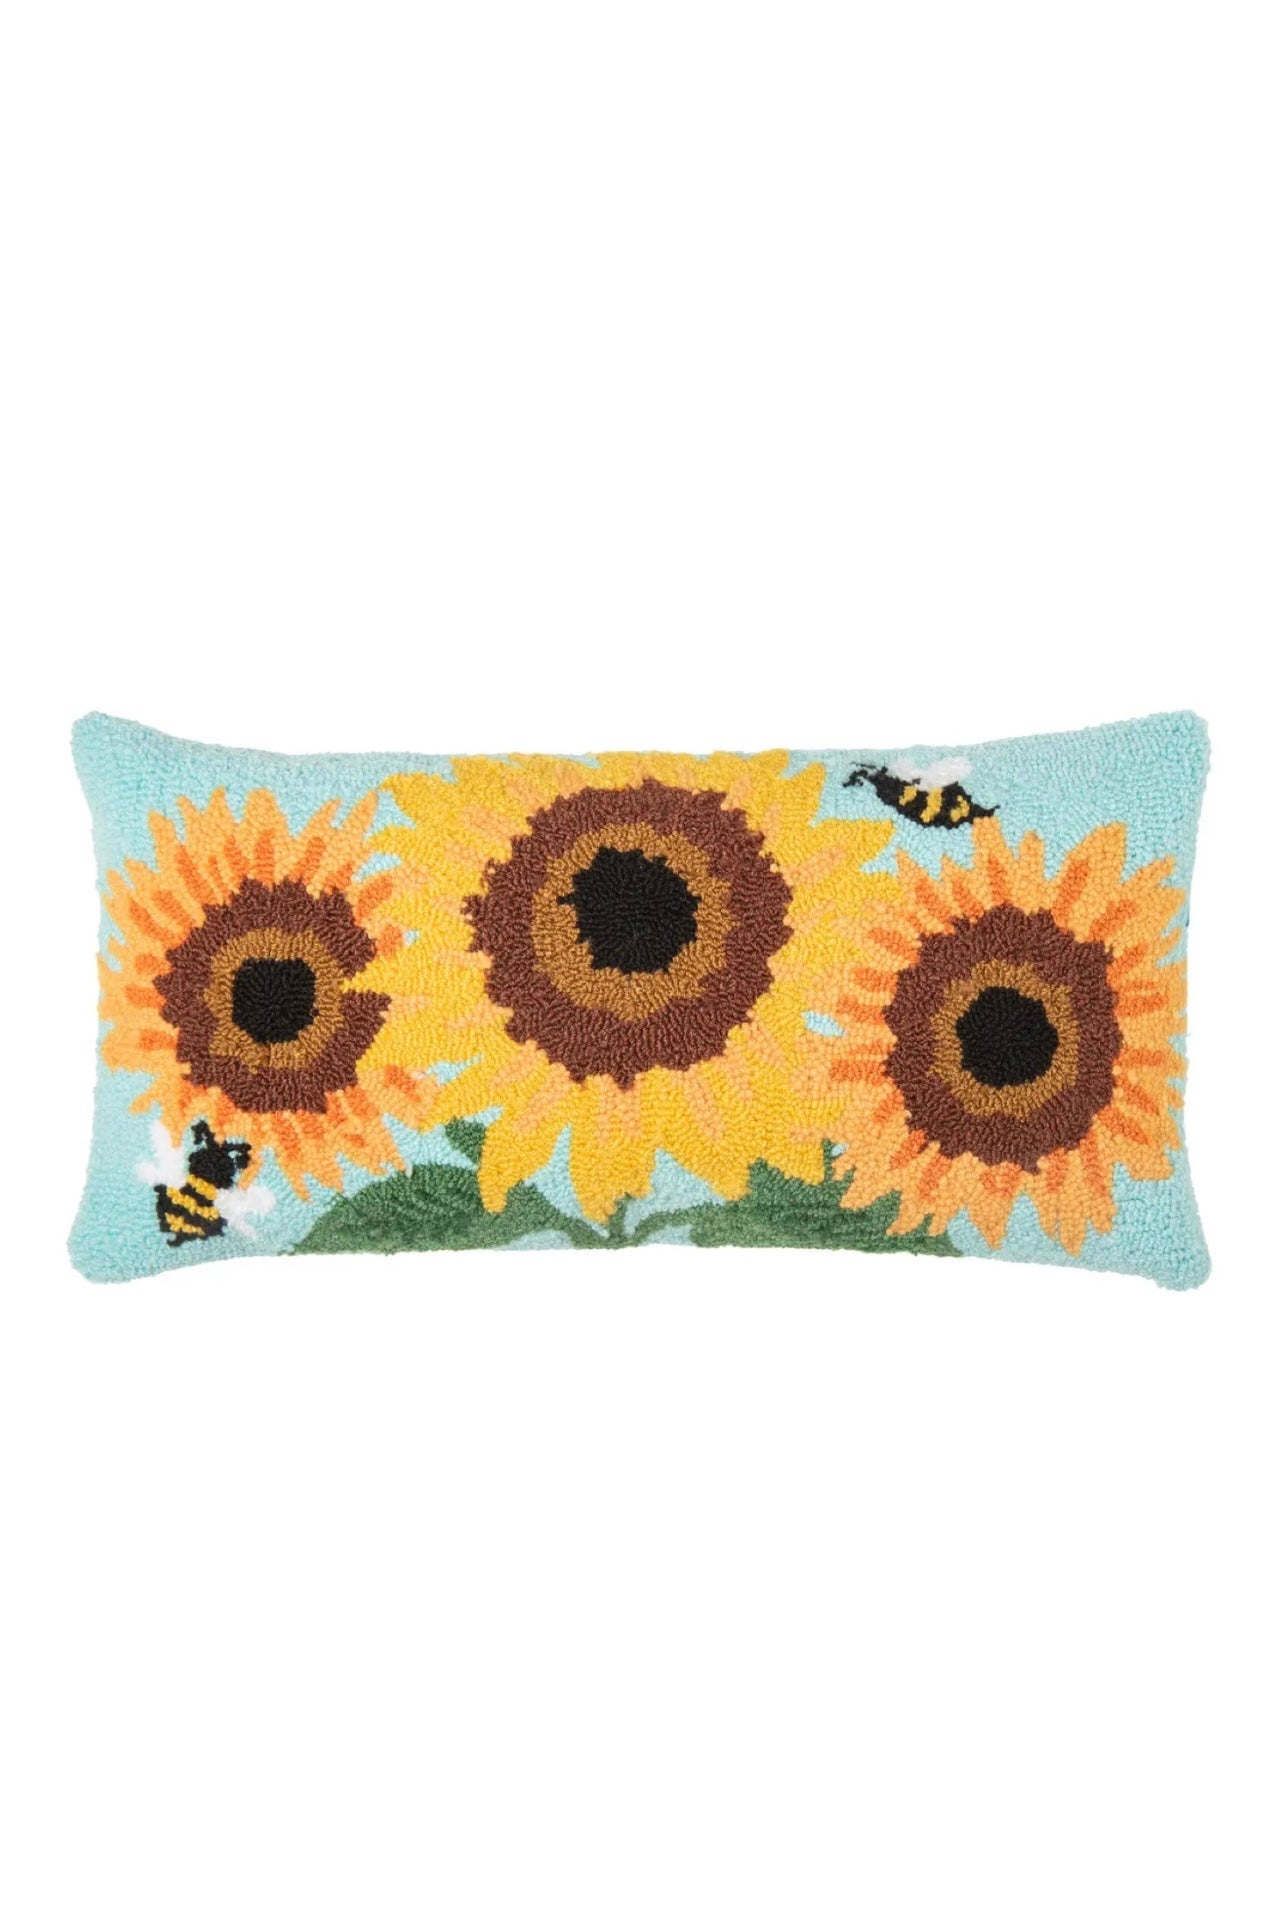 Sunflowers + Bees | Hooked Pillow